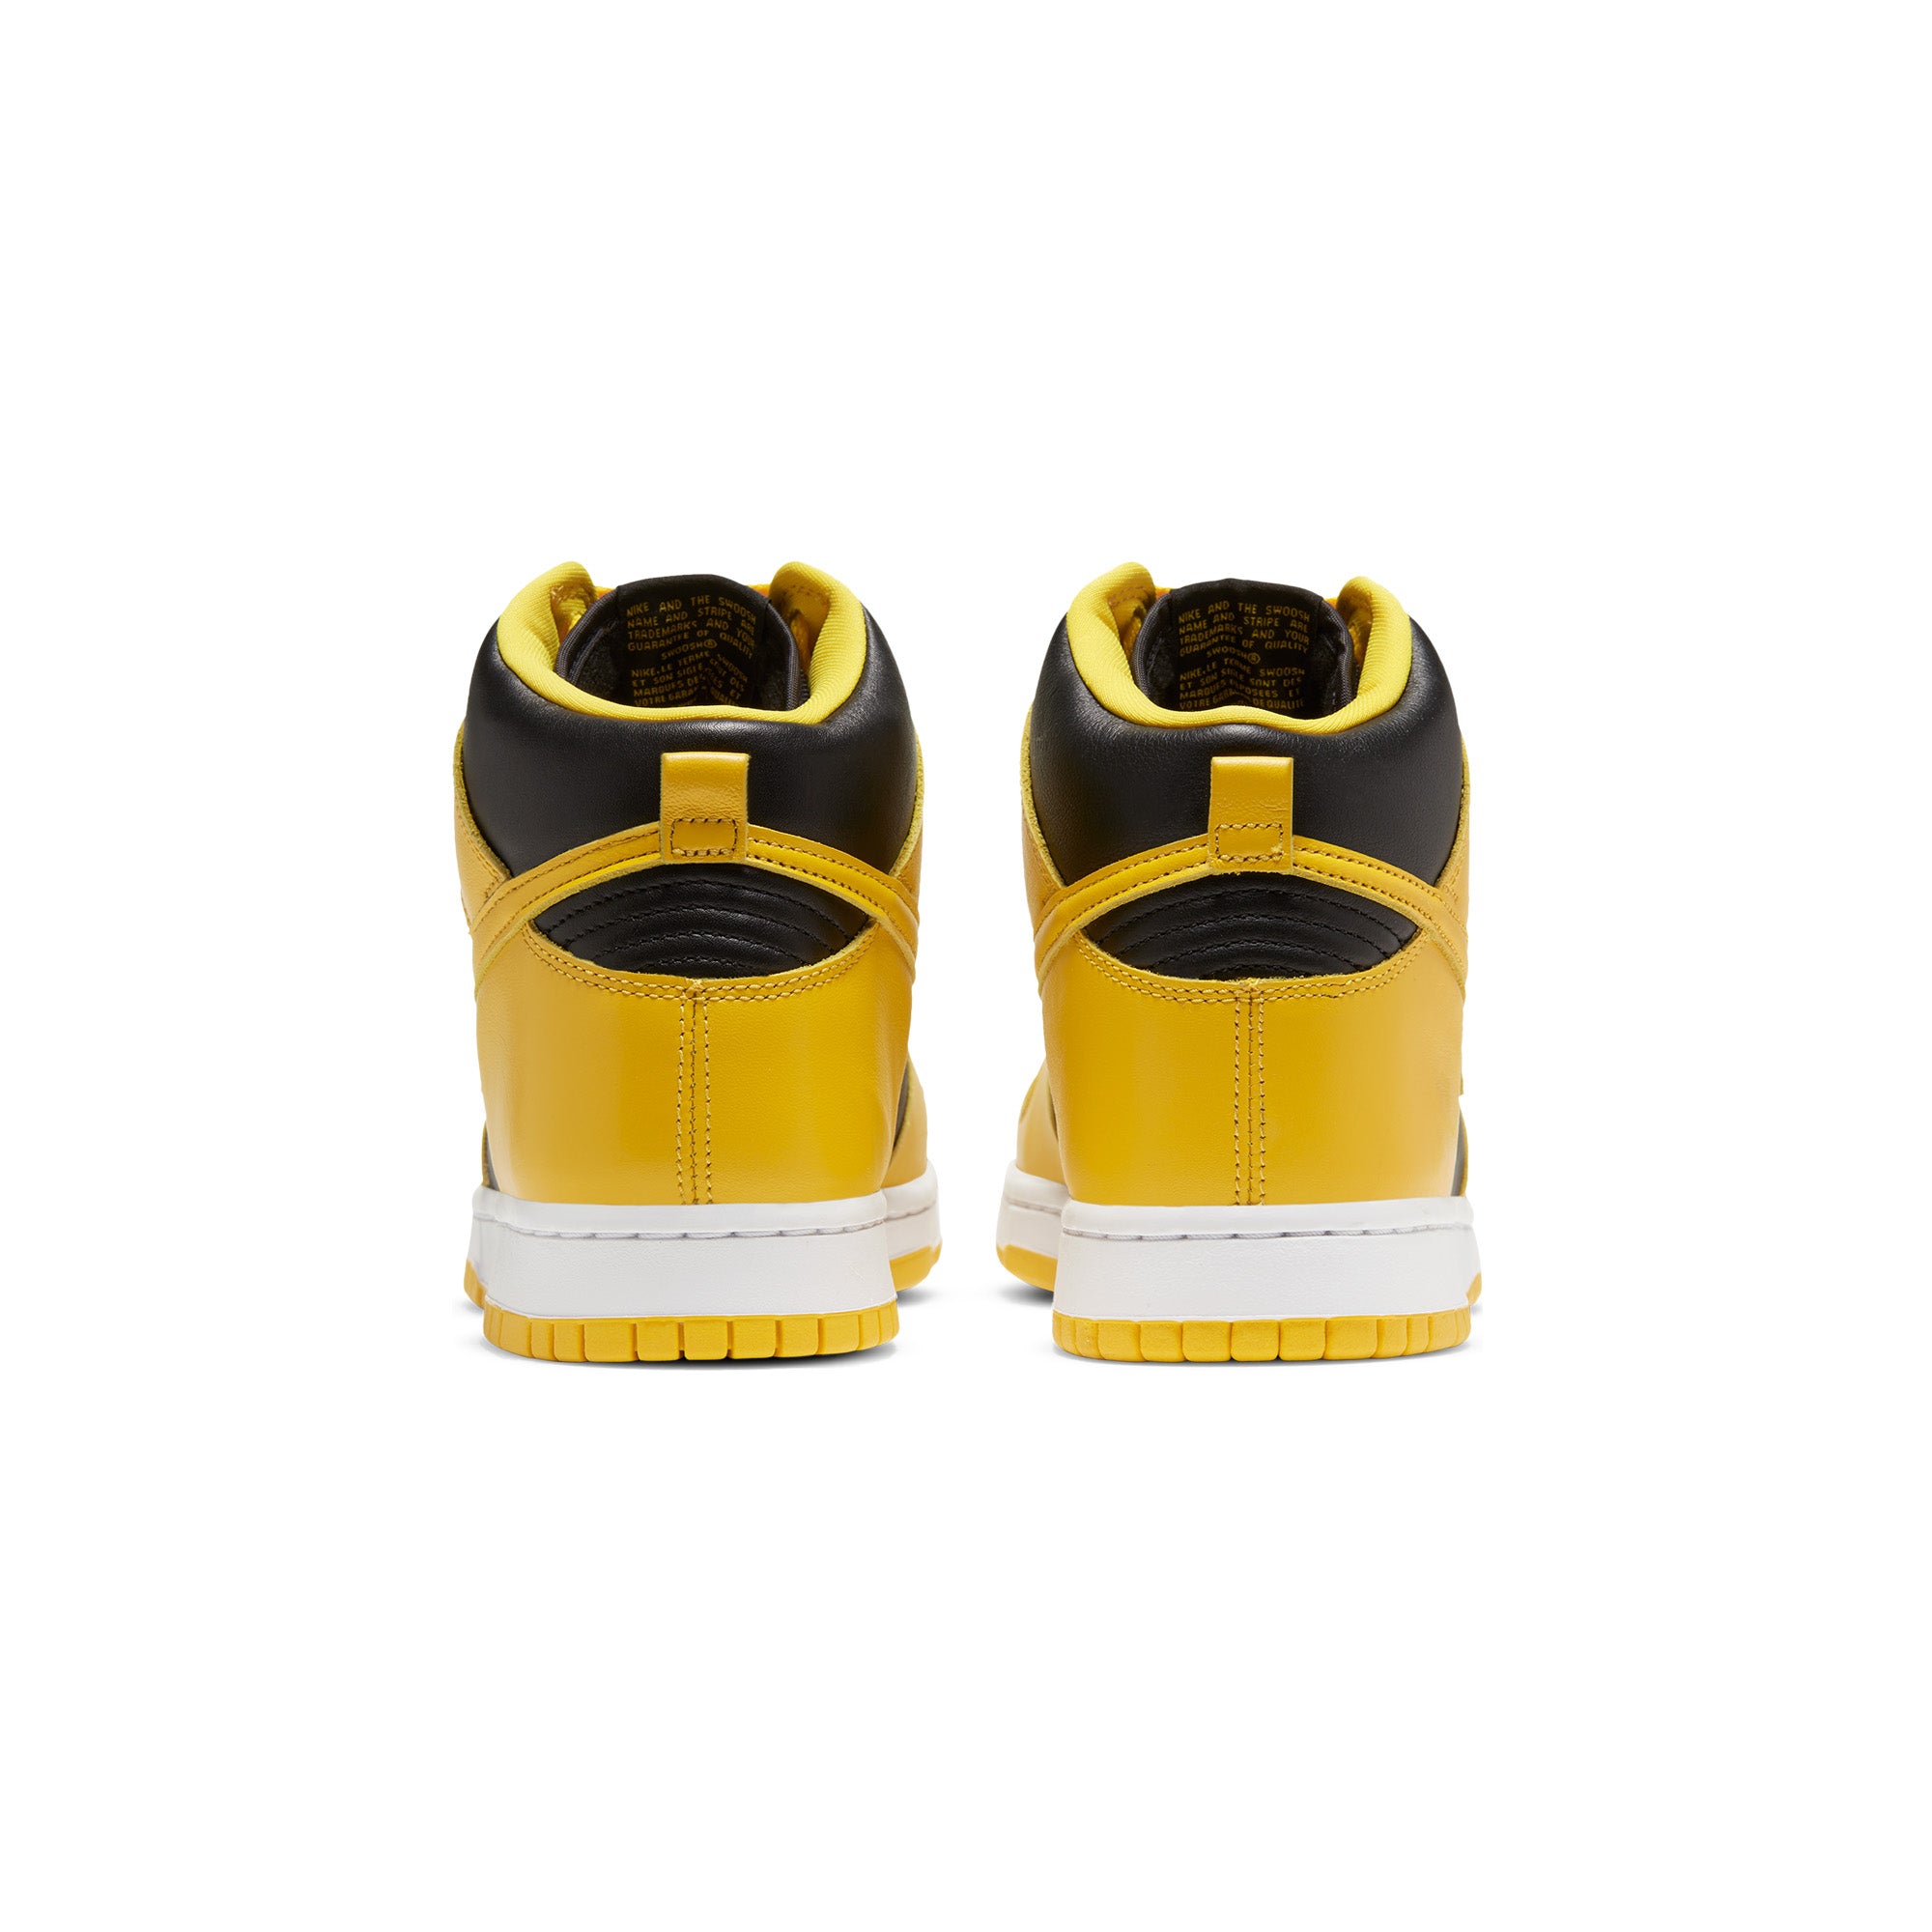 Nike Mens High Maize Shoes Extra Butter